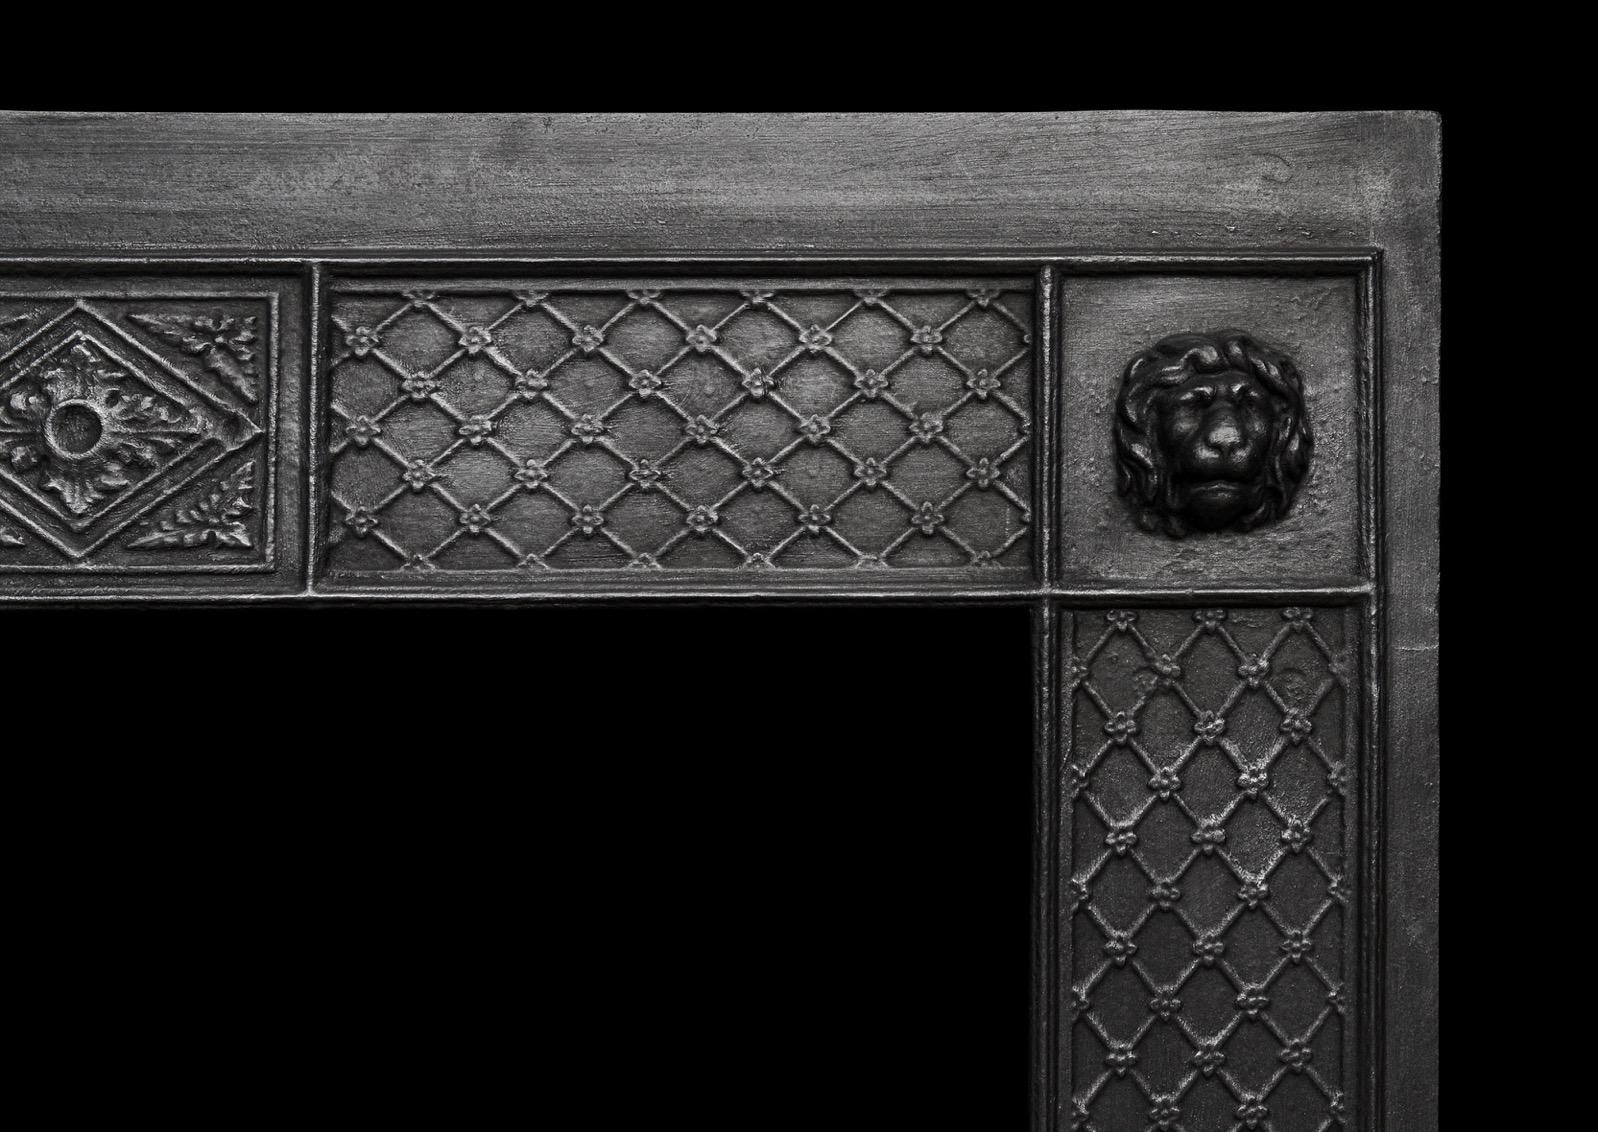 A decorative late Georgian cast iron insert. The frame with crosshatching throughout with lion masks to top. The burning area with shaped cast iron bars with guilloche fret below. English, late 18th century. Could be fully polished if